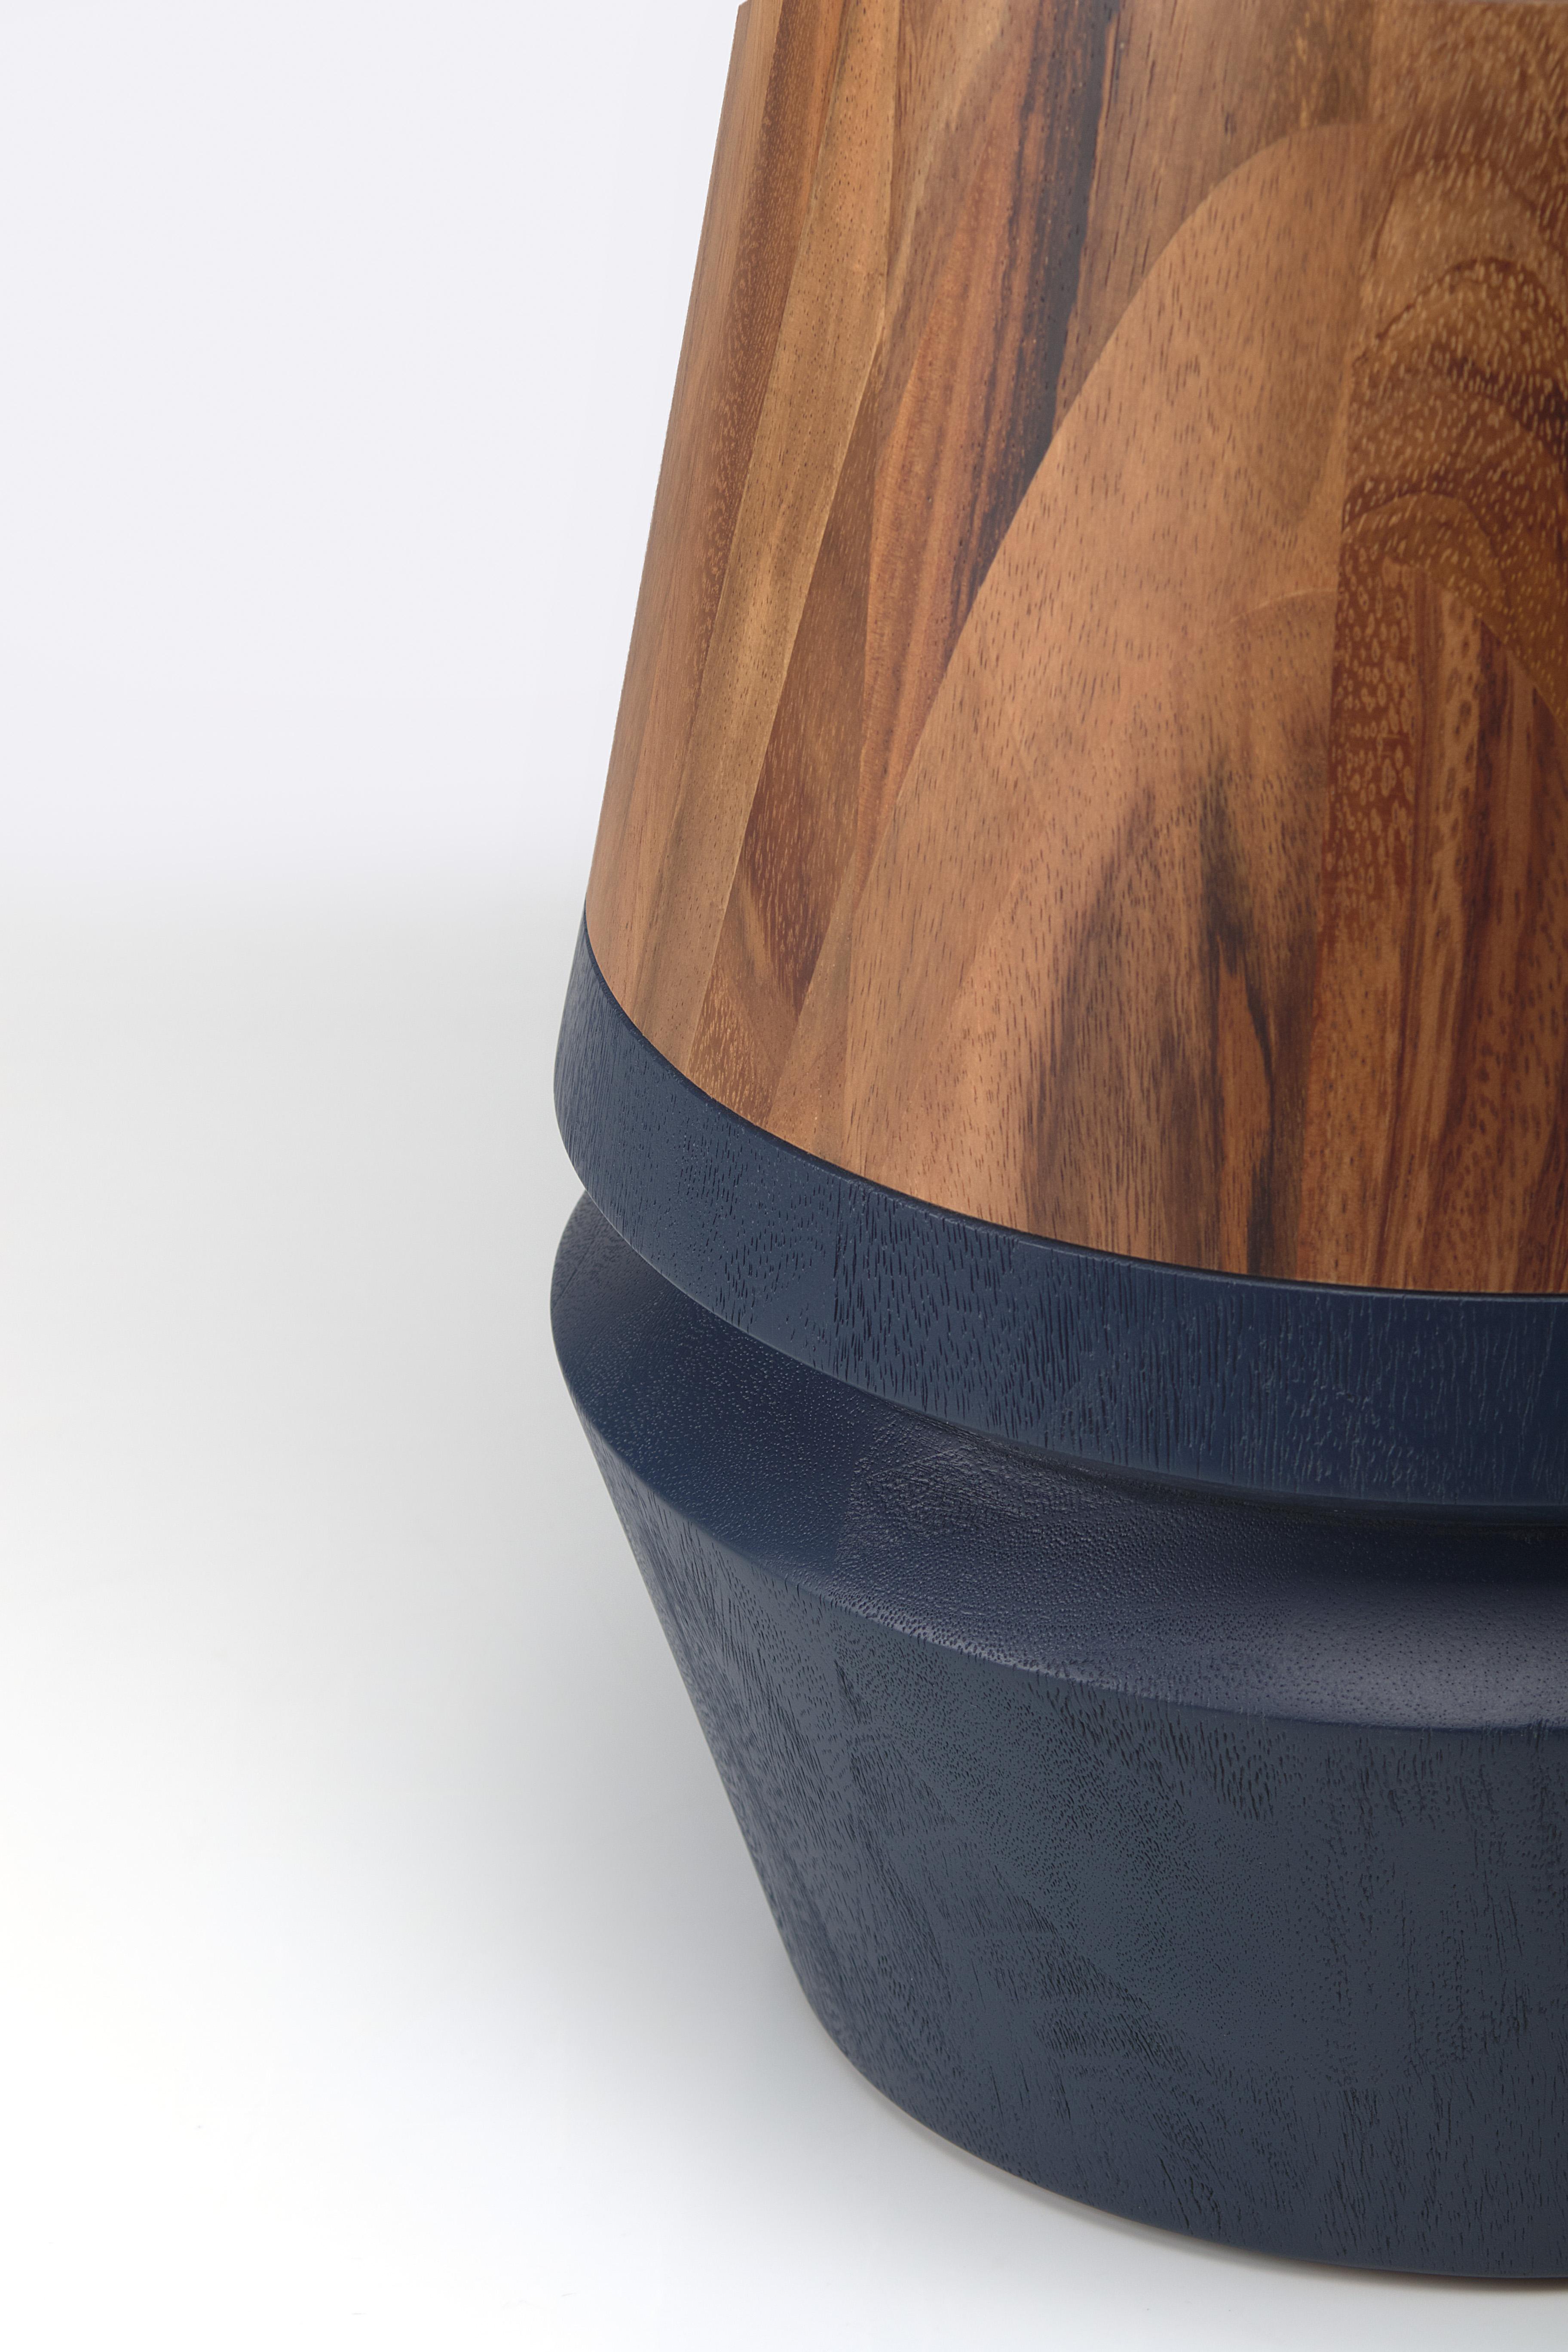 Bask in the beauty of a fusion between tradition and contemporary design with our Capirucho Turned Side Table in Navy and Conacaste. Reflecting the joyous spirit of a beloved Guatemalan toy, this playful side table is a modern interpretation that